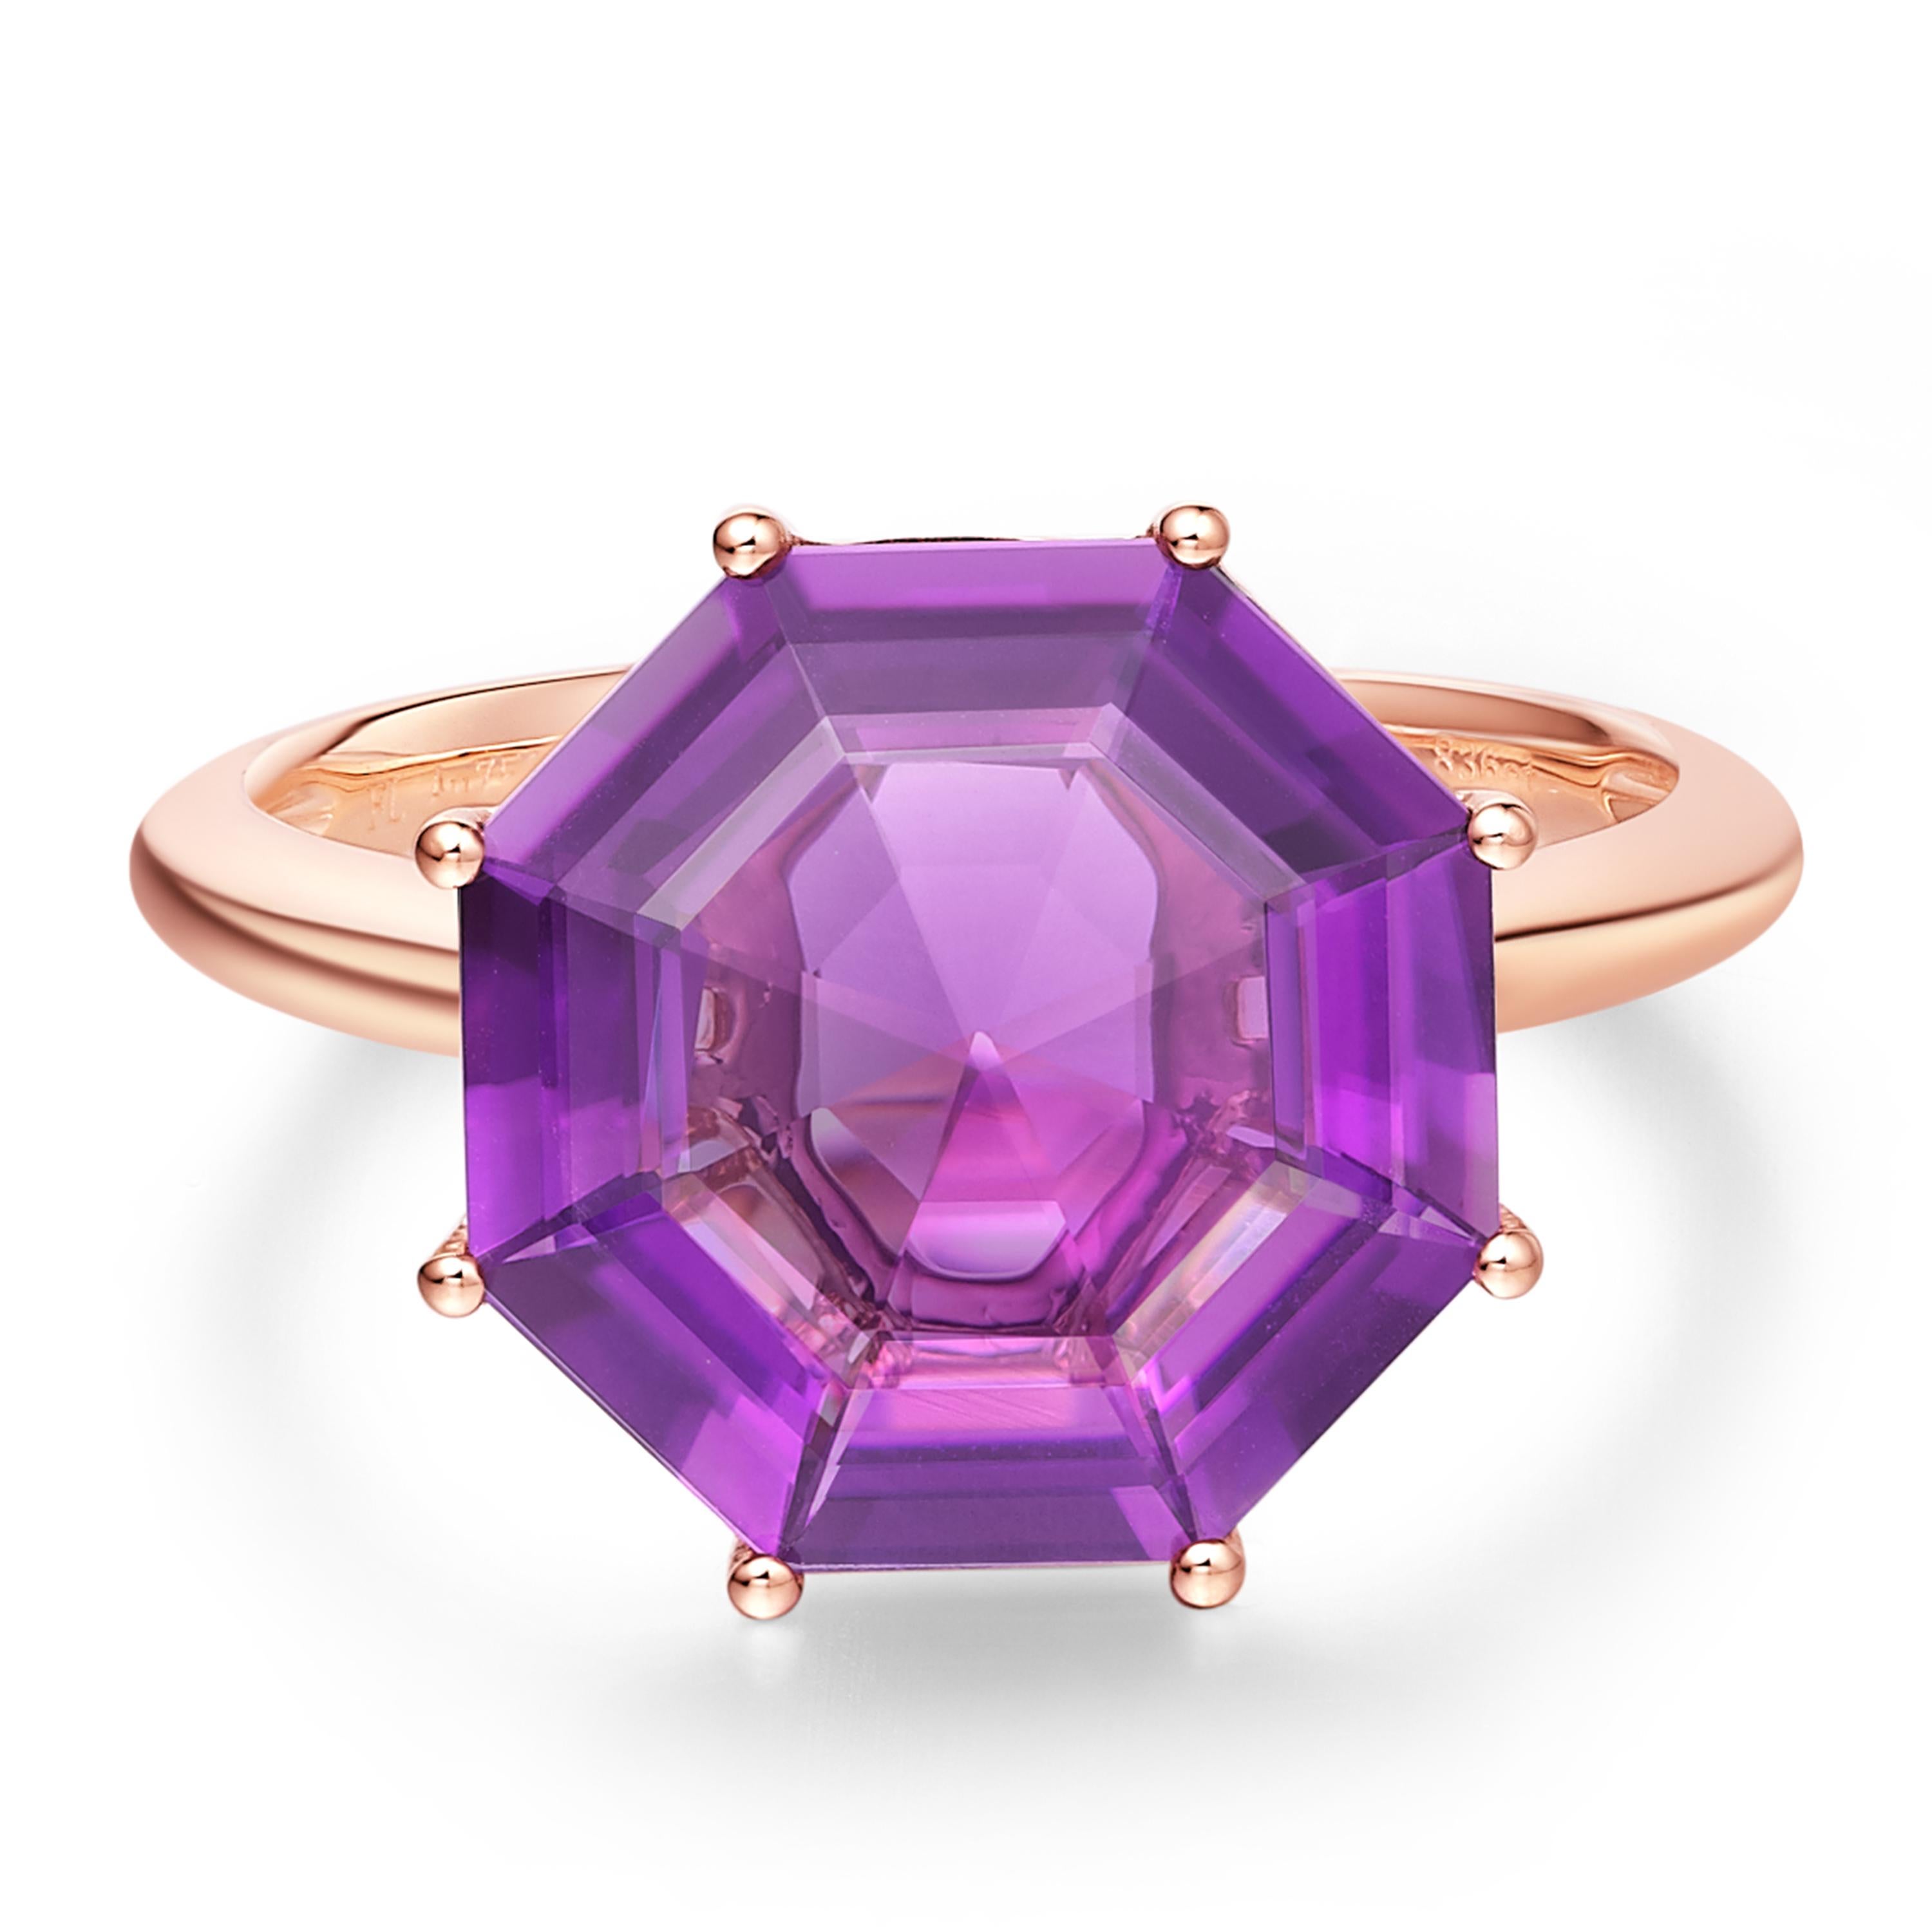 Description:
Victoriana large octagon cut ring with 4.80ct purple amethyst set in 18ct rose gold.

Ring sizes available: N (UK) / 6.75 (US) 

Inspiration:
A deluxe 18ct gold collection inspired by Victorian design. Fei Liu’s Victoriana collection